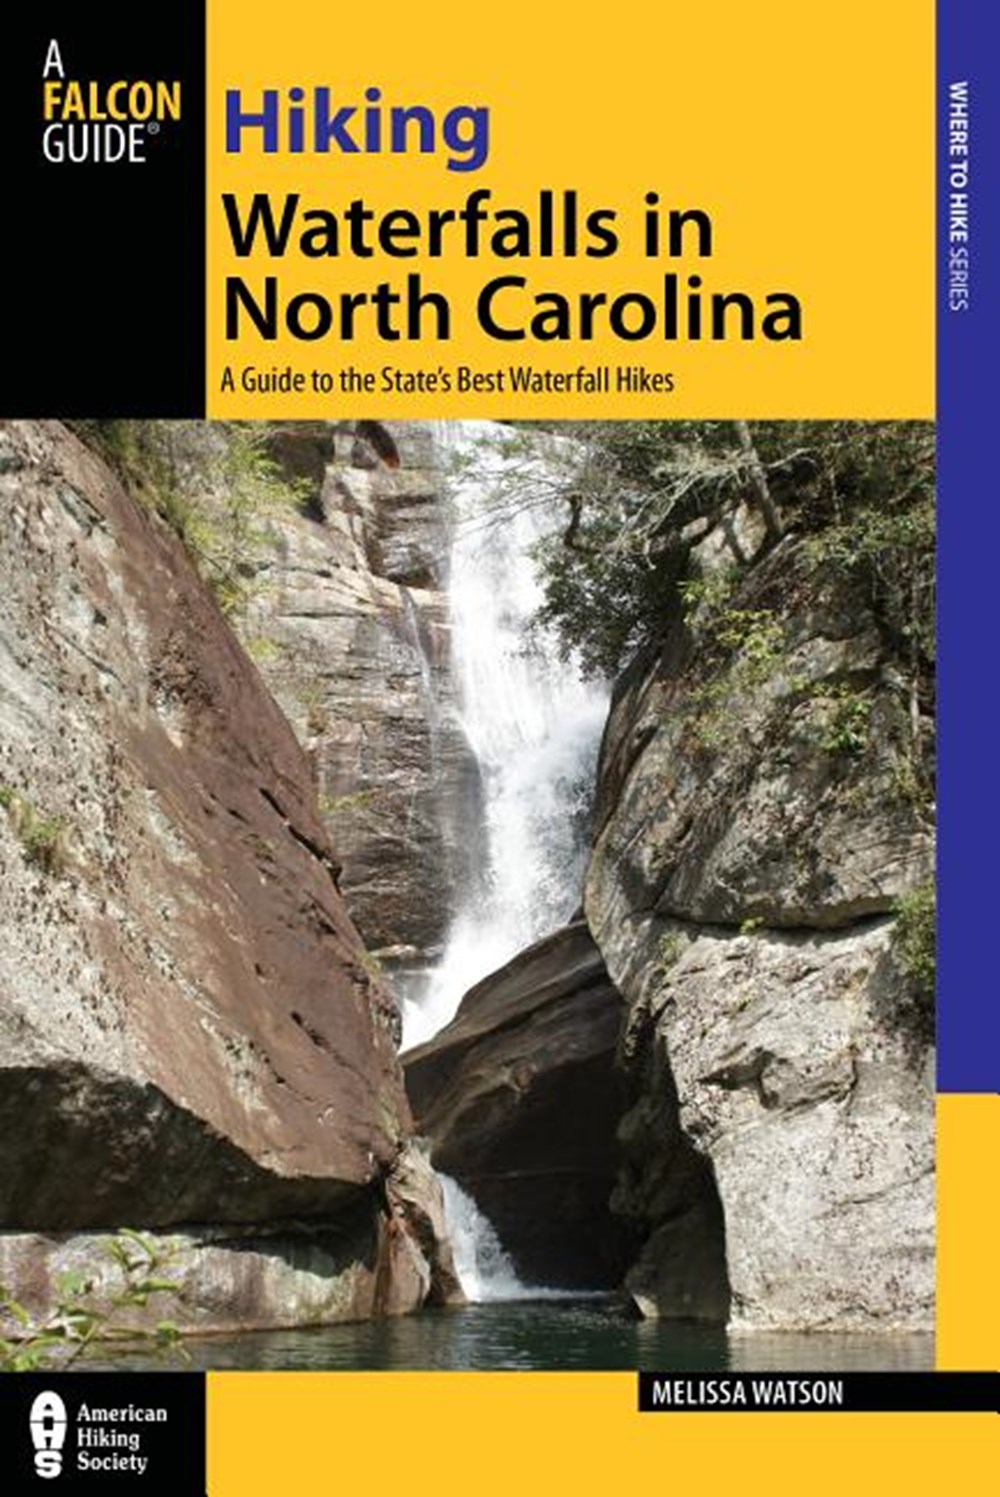 Hiking Waterfalls in North Carolina: A Guide to the State's Best Waterfall Hikes